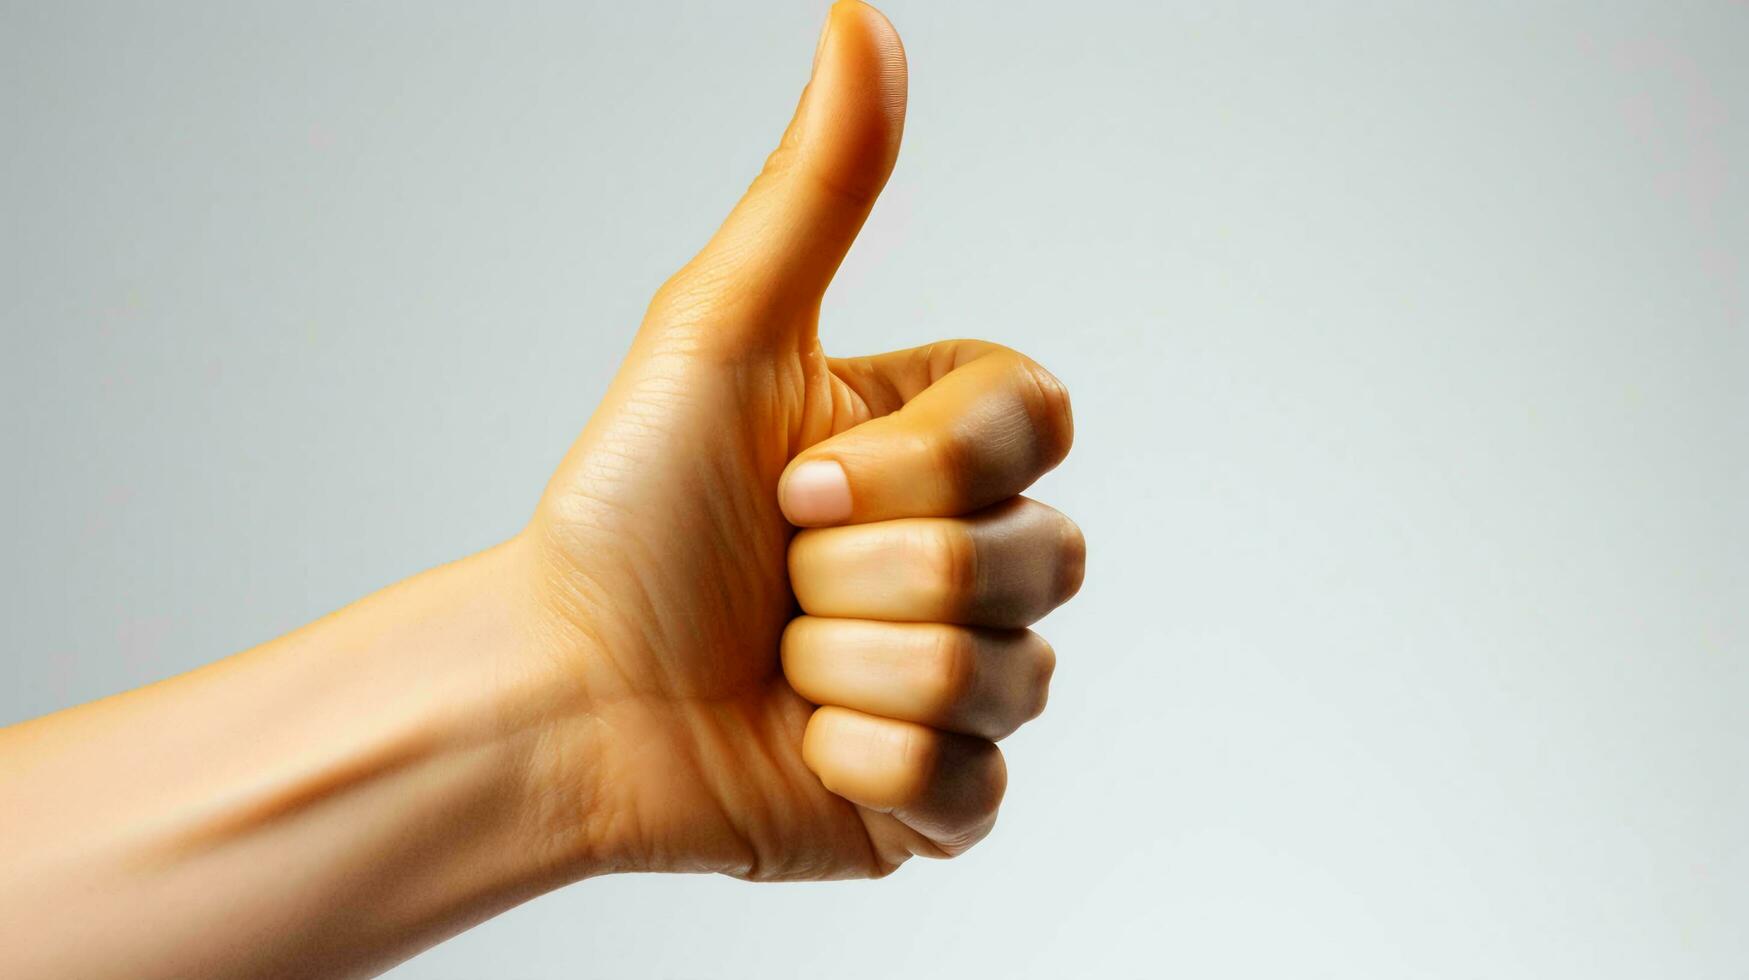 Hand showing super thumb up gesture on white background photo